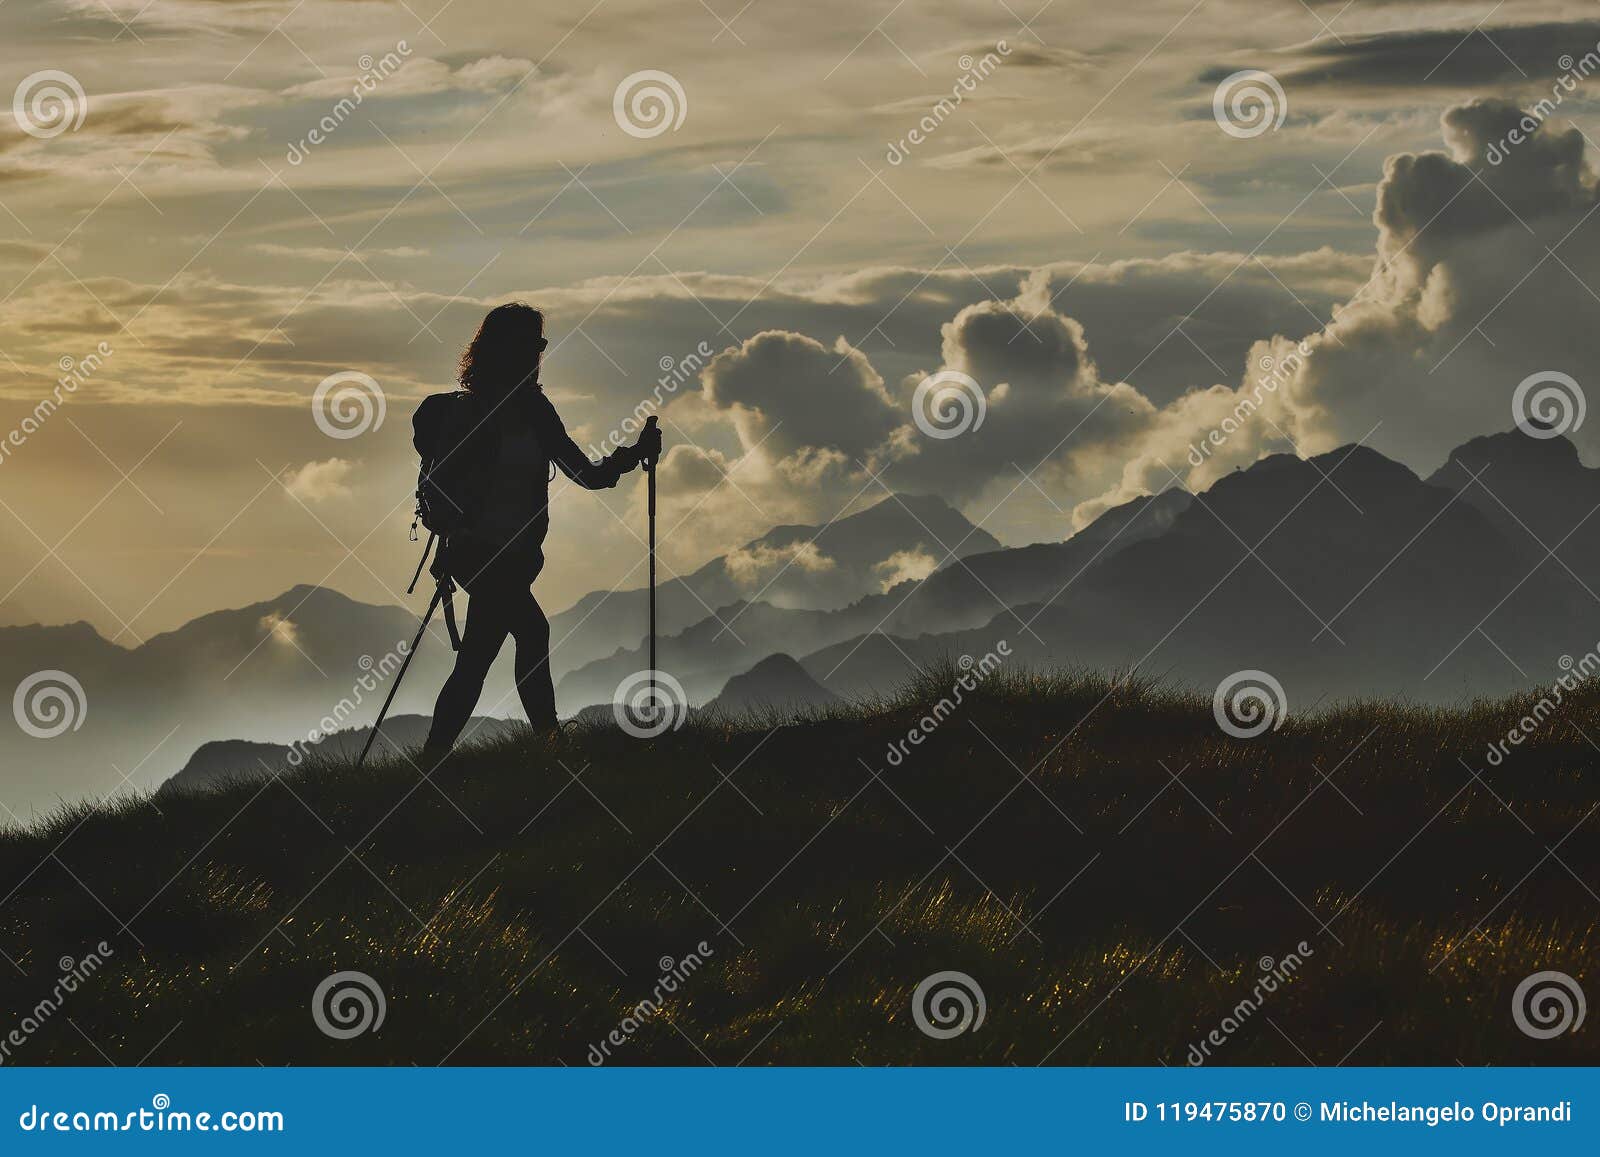 walk in solitude on the alps. a woman on with the background of